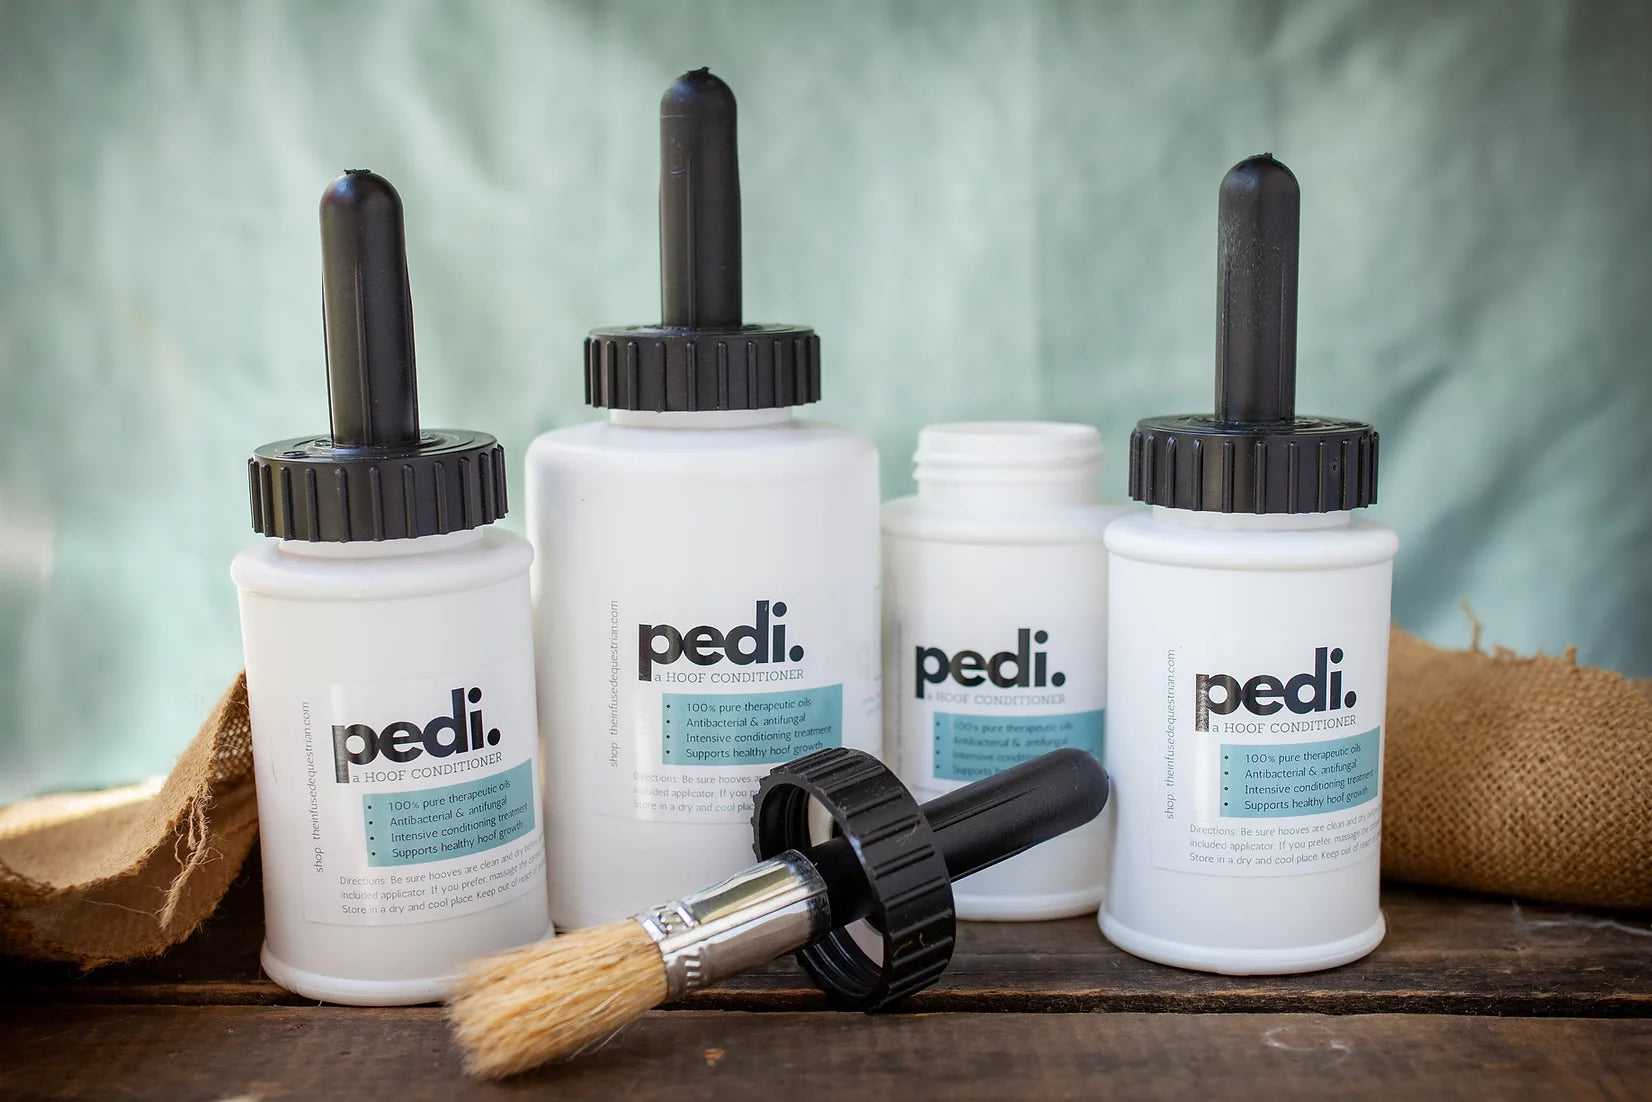 The Infused Equestrian - pedi. A Hoof Conditioner